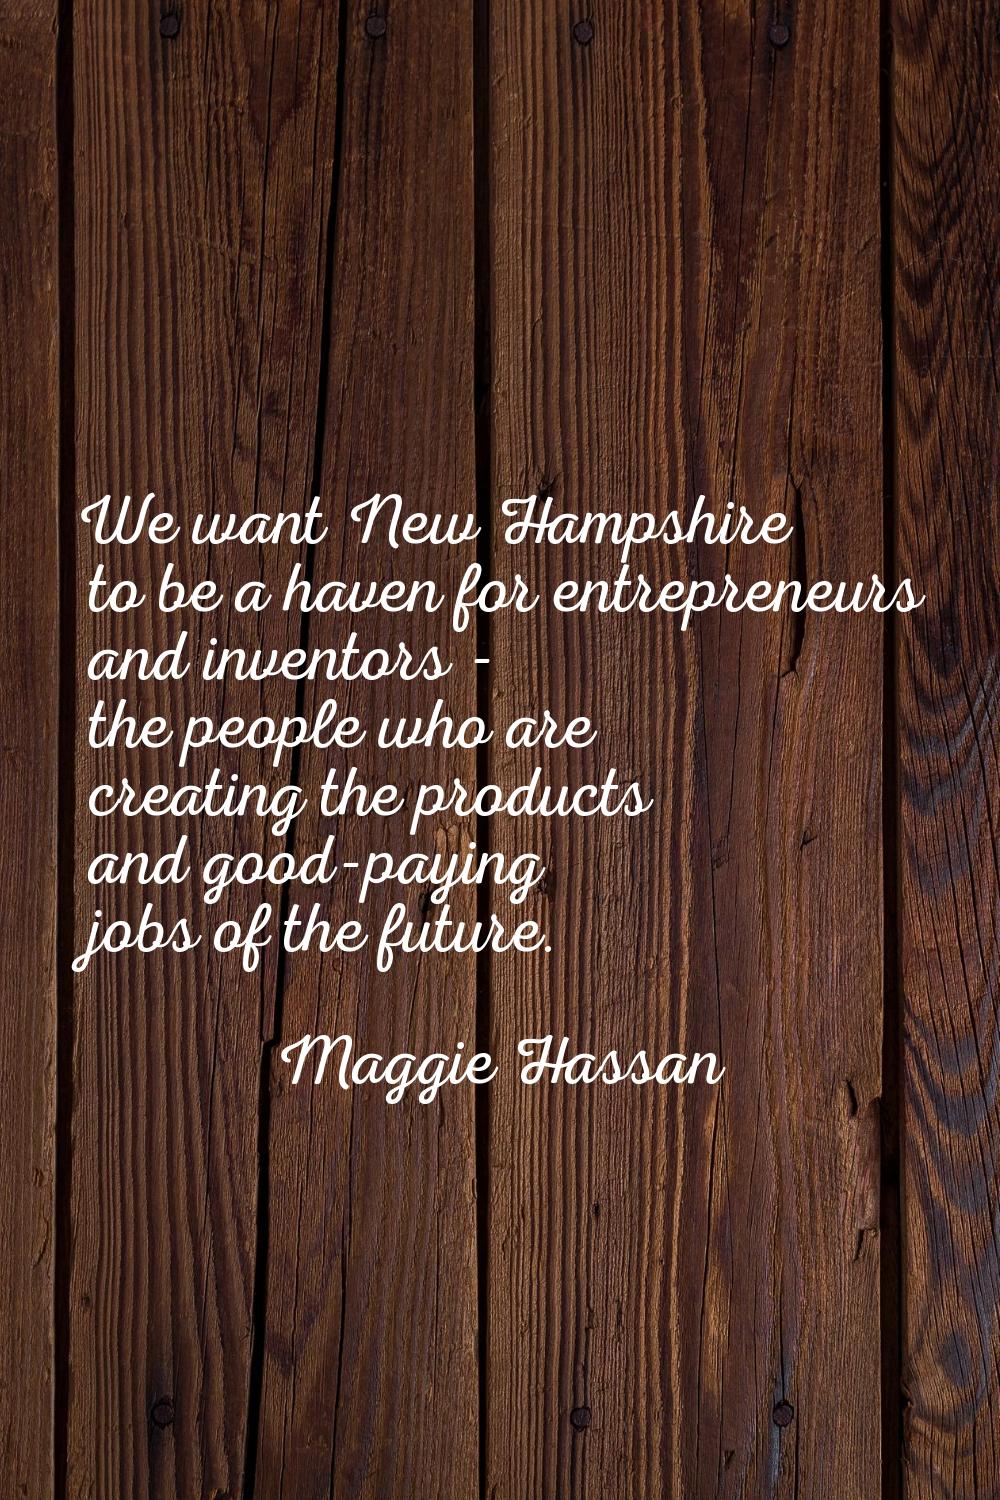 We want New Hampshire to be a haven for entrepreneurs and inventors - the people who are creating t